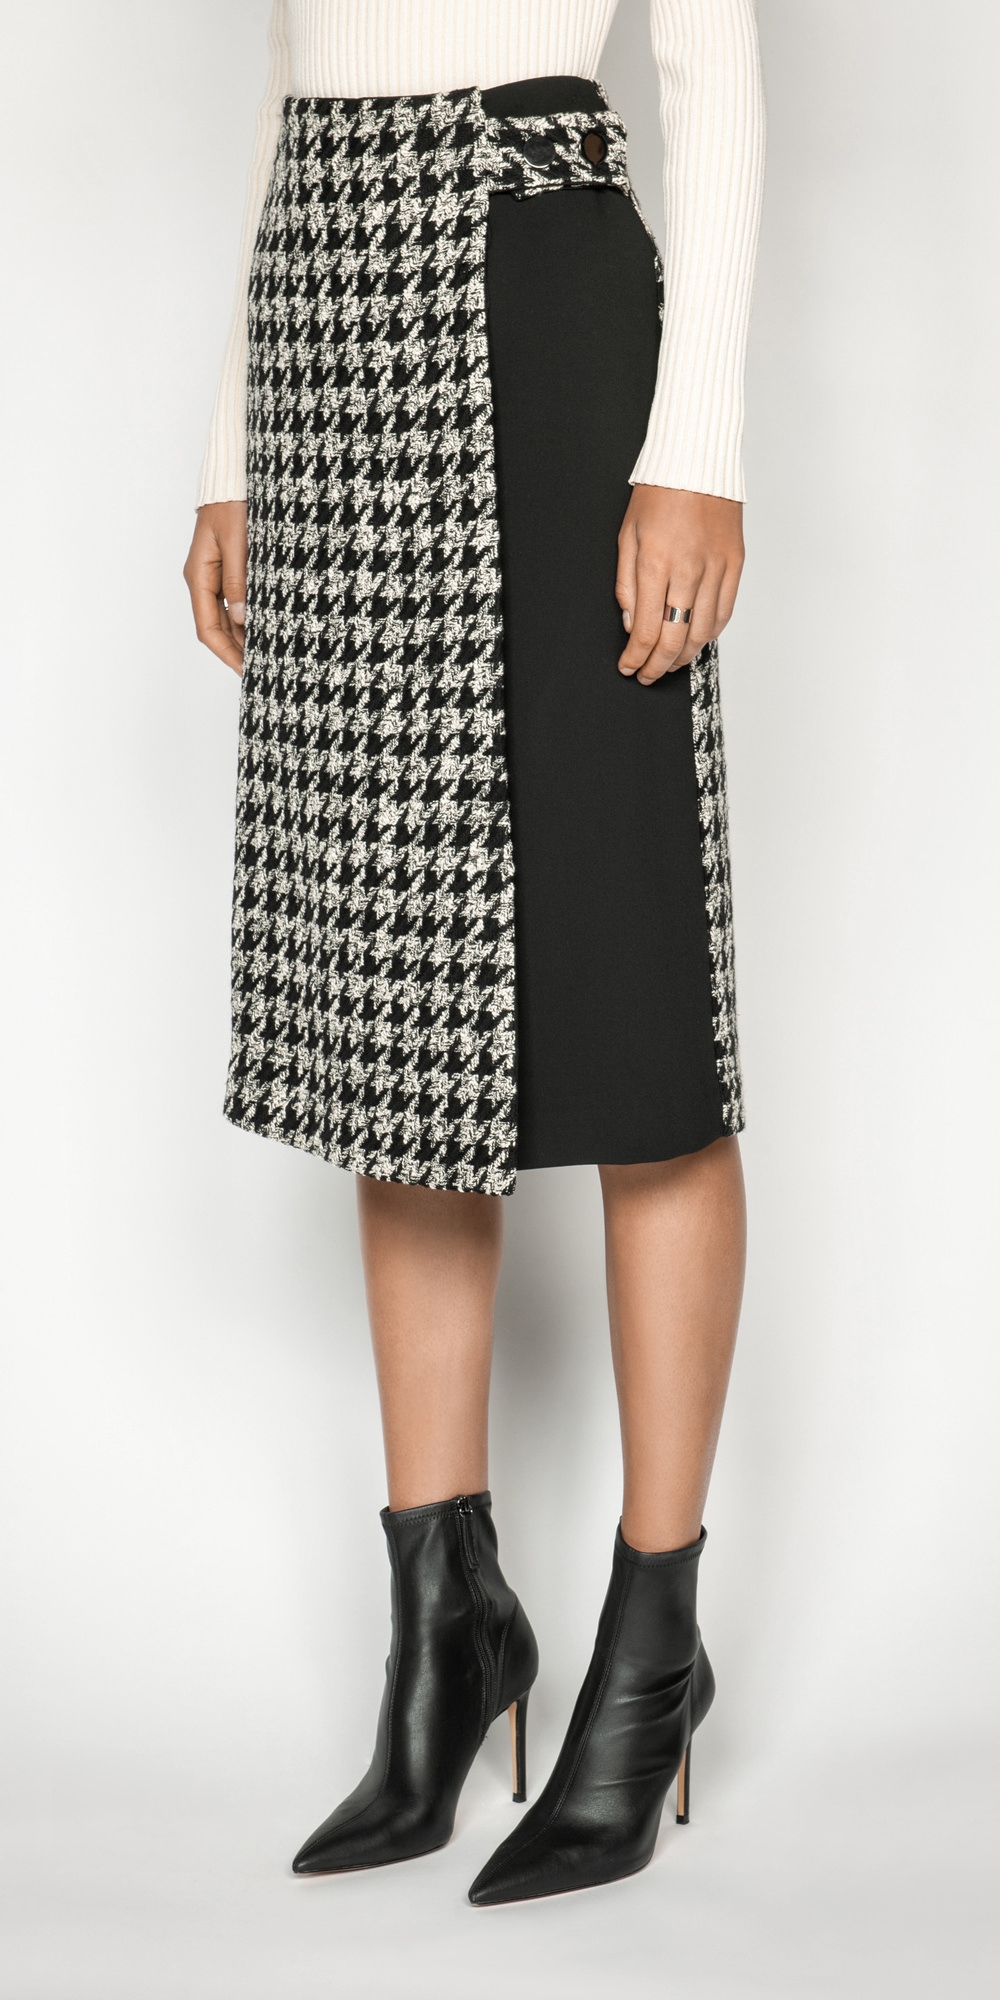 Boucle Houndstooth Wrap Skirt | Buy Skirts Online - Cue